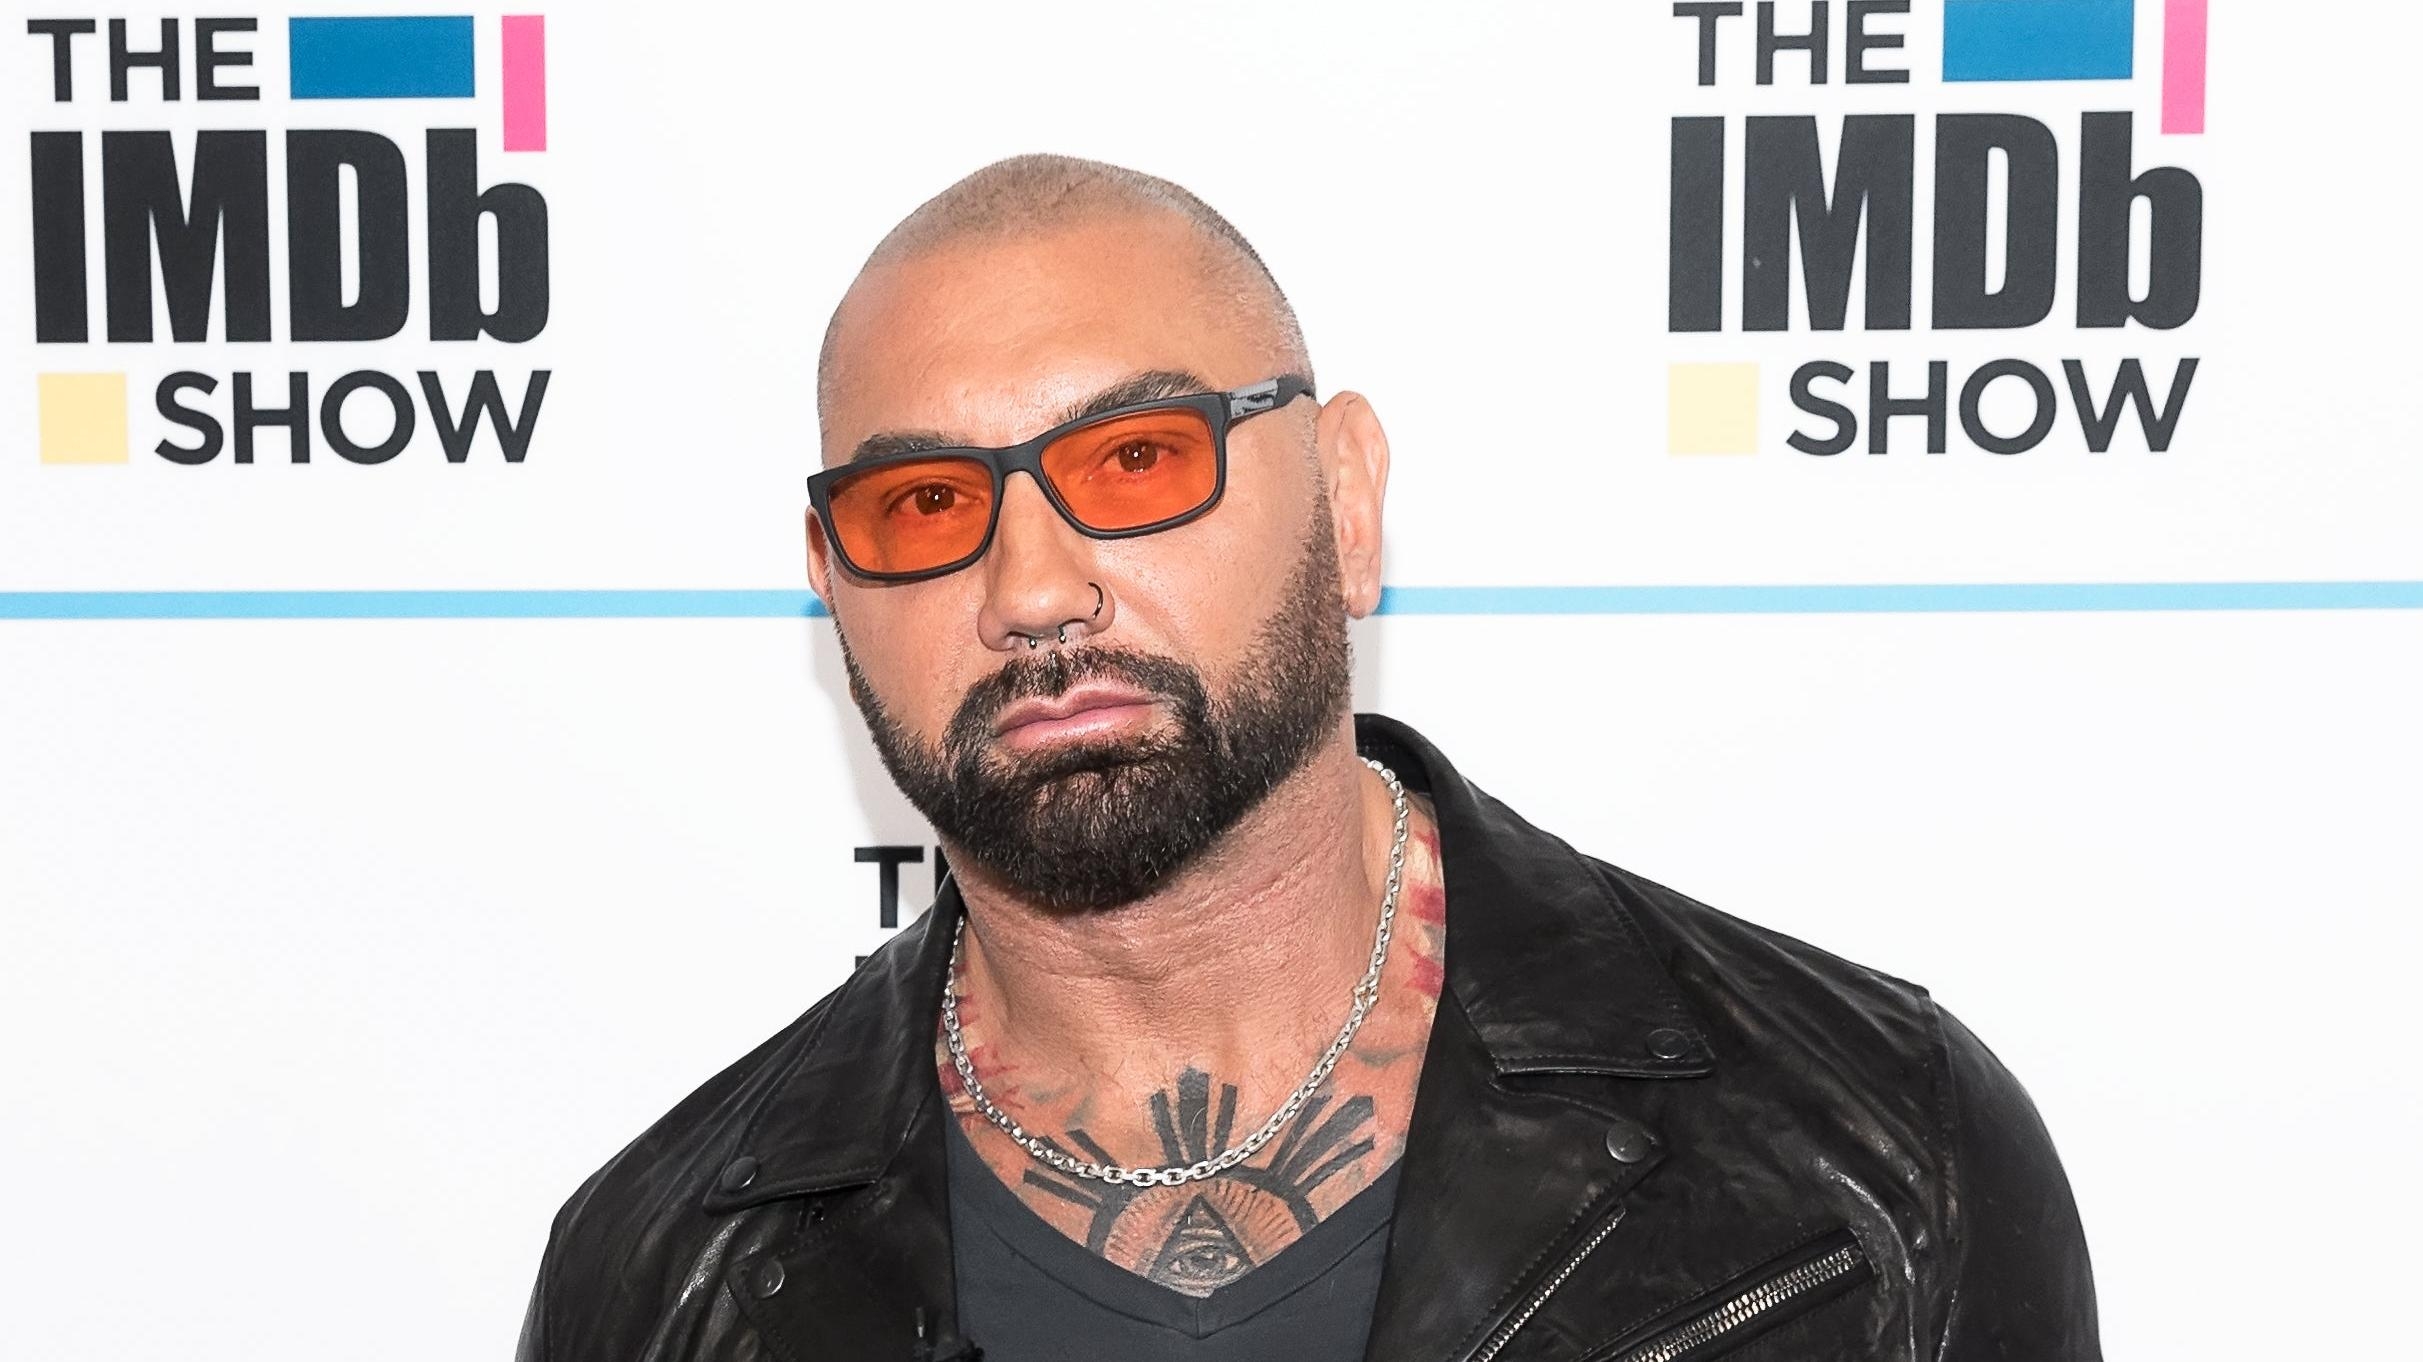 Dave Bautista explains why he's not in James Gunn's The Suicide Squad